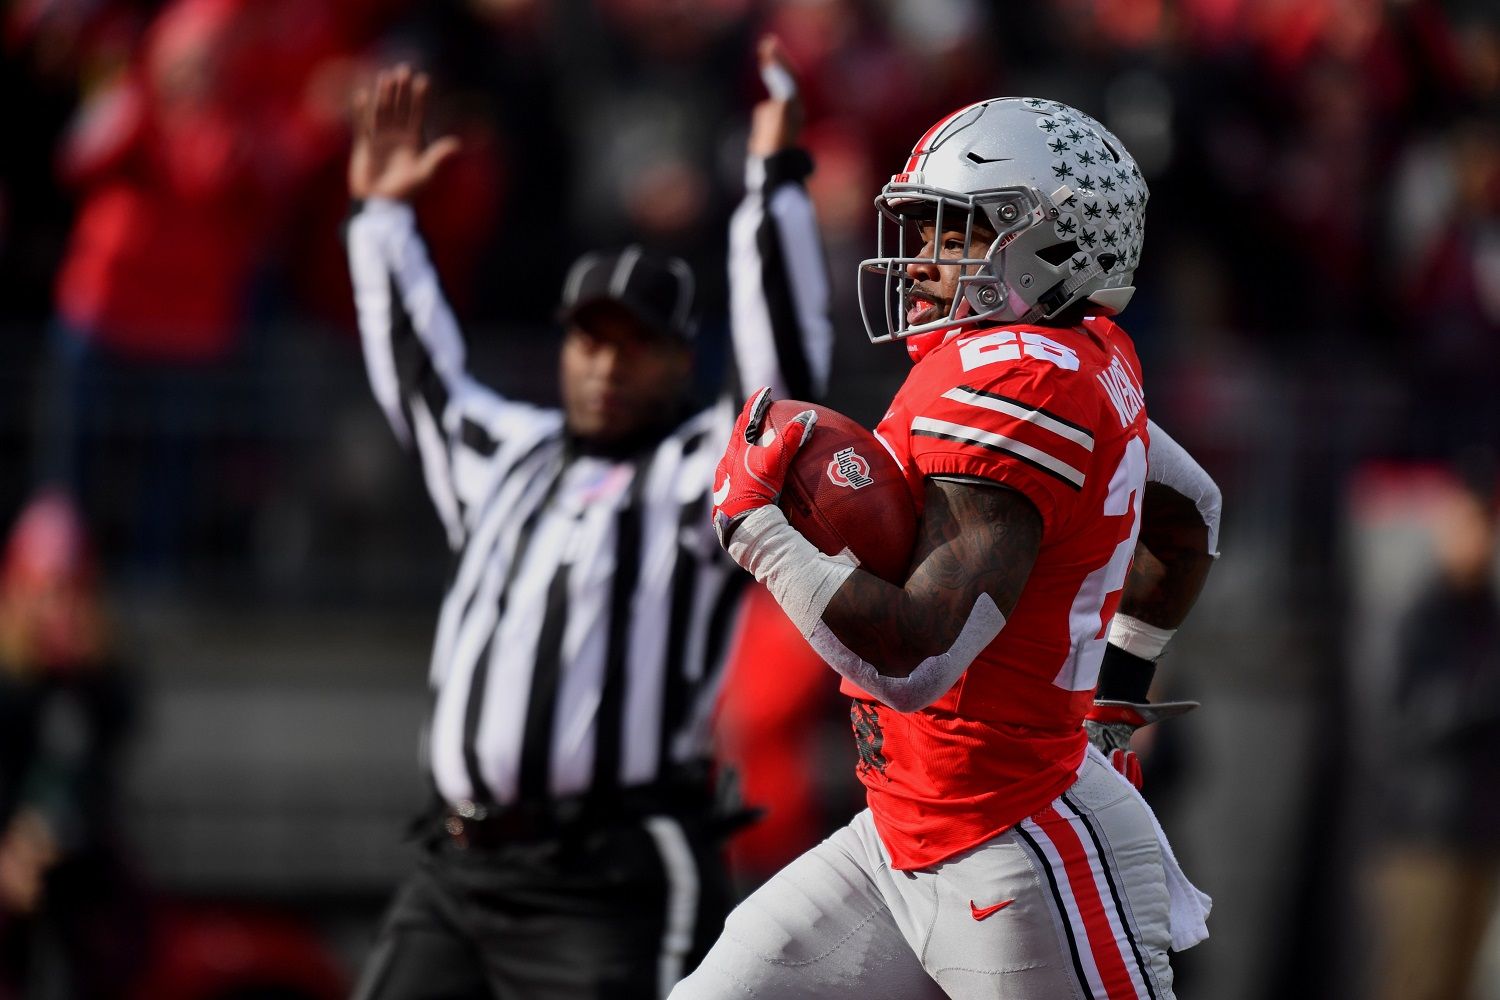 COLUMBUS, OH - NOVEMBER 11:  Mike Weber #25 of the Ohio State Buckeyes scores on an 82-yard touchdown run in the second quarter against the Michigan State Spartans at Ohio Stadium on November 11, 2017 in Columbus, Ohio.  (Photo by Jamie Sabau/Getty Images)